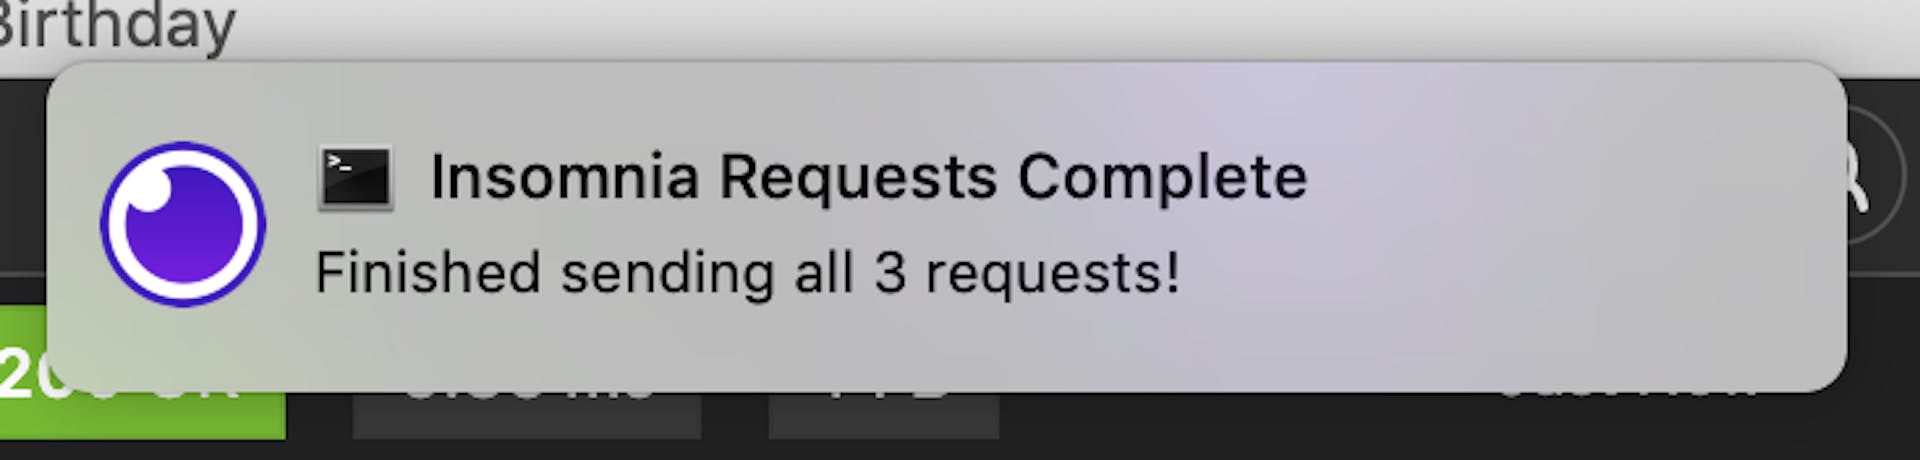 Desktop notification appears once all requests have been sent